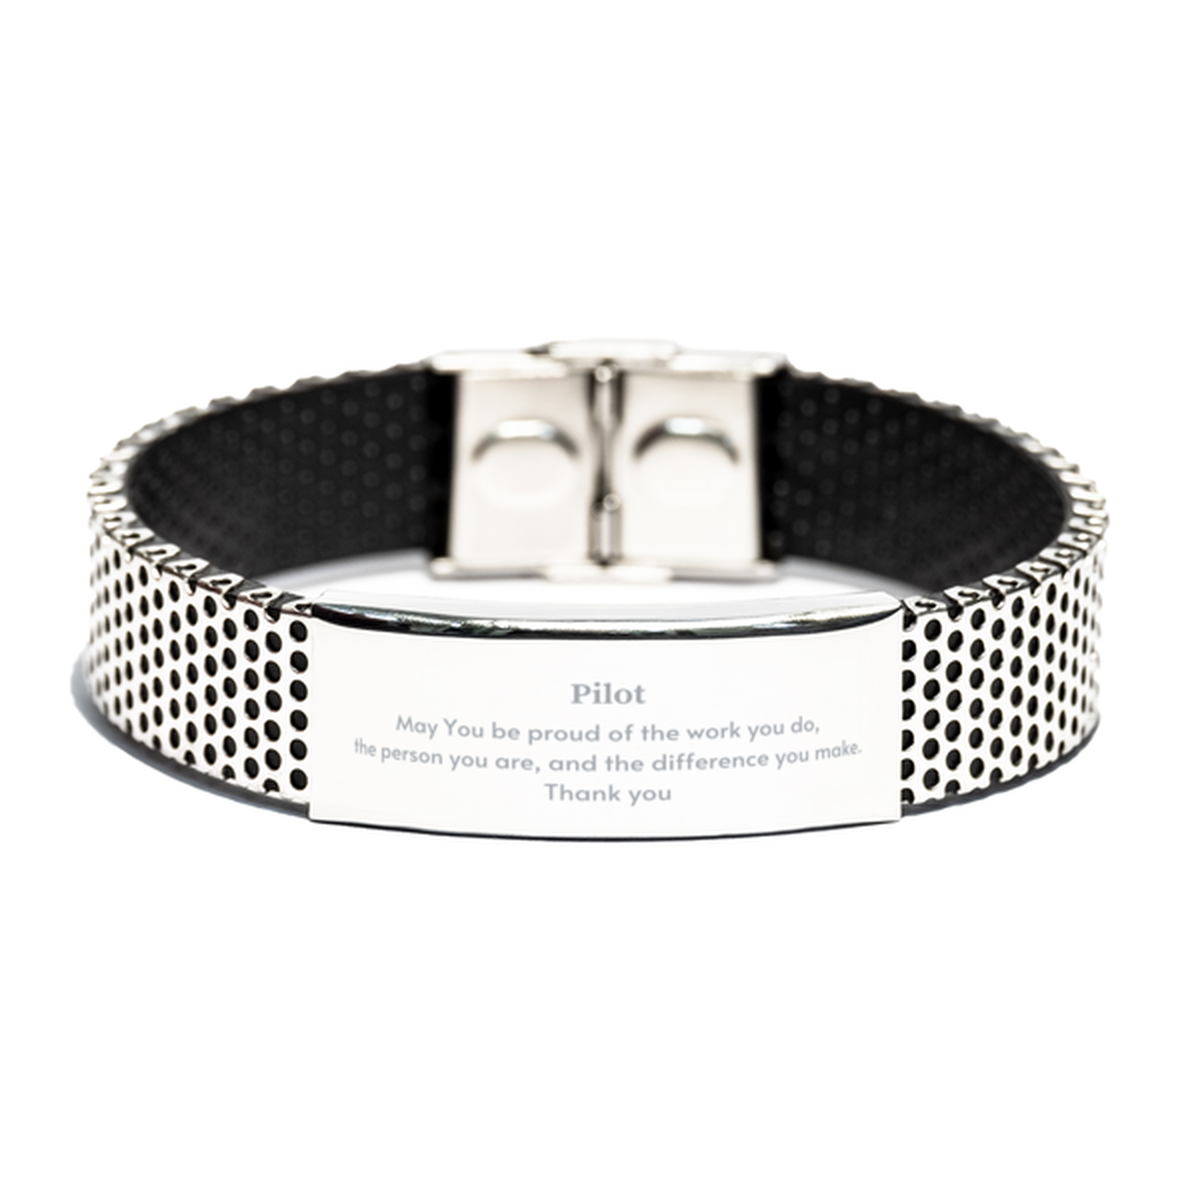 Heartwarming Stainless Steel Bracelet Retirement Coworkers Gifts for Pilot, Pilot May You be proud of the work you do, the person you are Gifts for Boss Men Women Friends